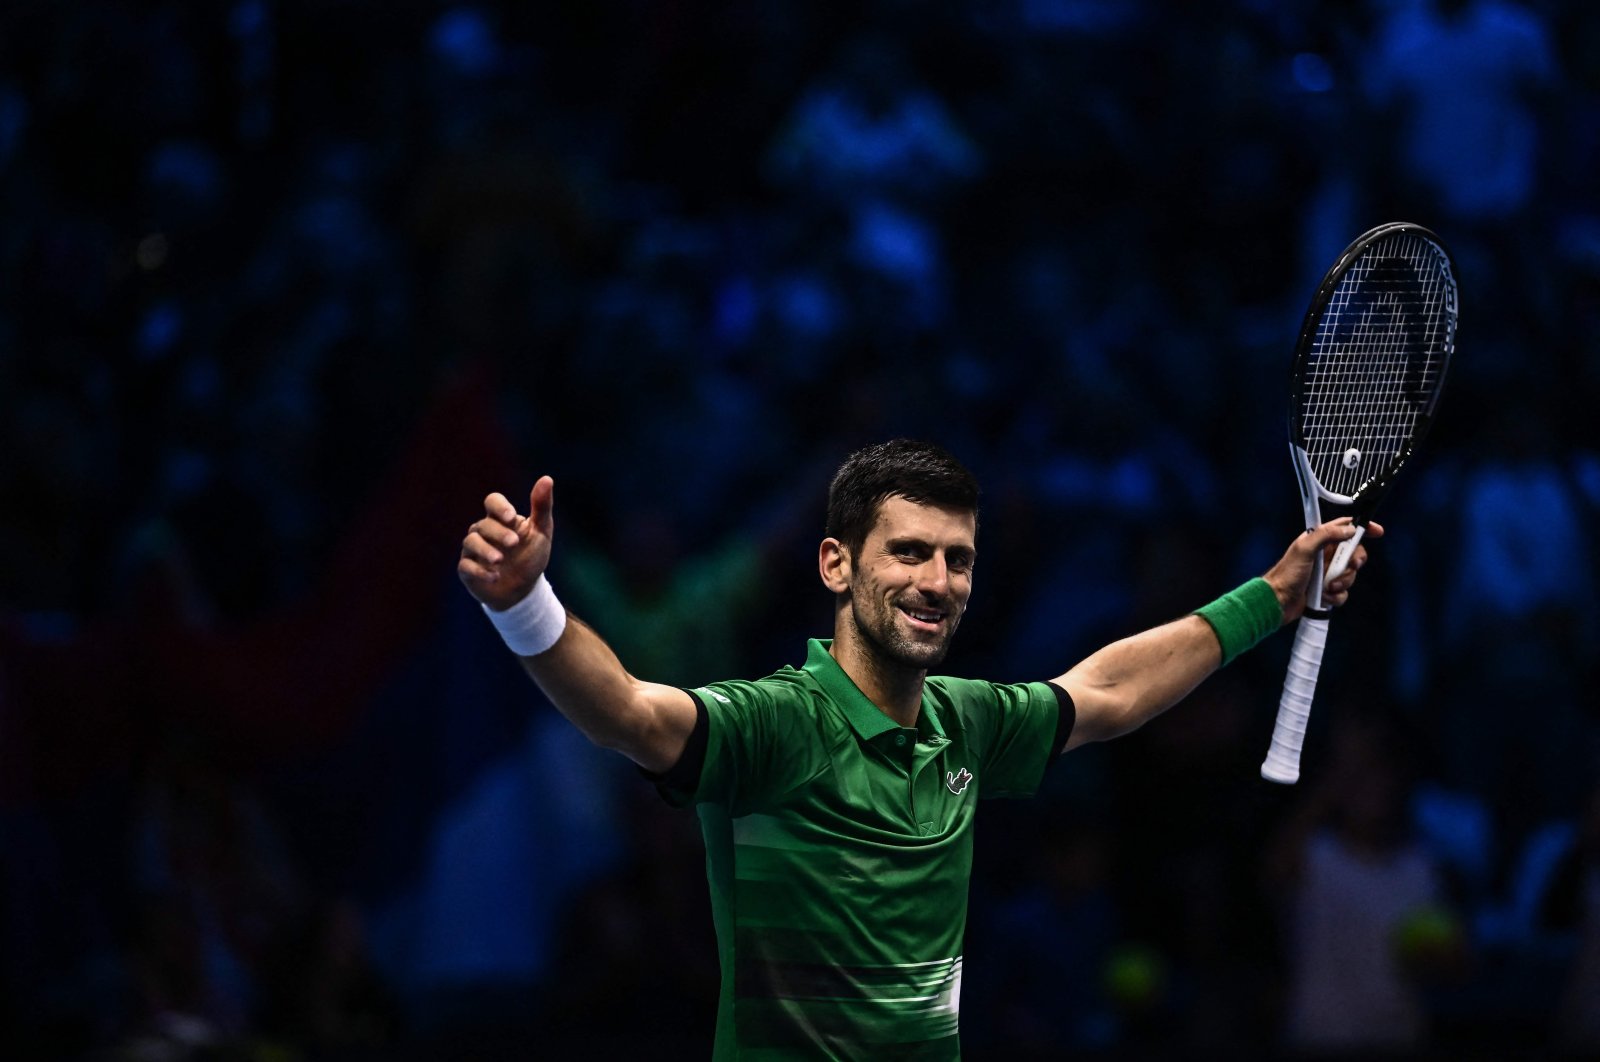 Serbia&#039;s Novak Djokovic celebrates after winning his men&#039;s single final match against Norway&#039;s Casper Ruud at the ATP Finals tennis tournament, Turin, Italy, Nov. 20, 2022. (AFP Photo)